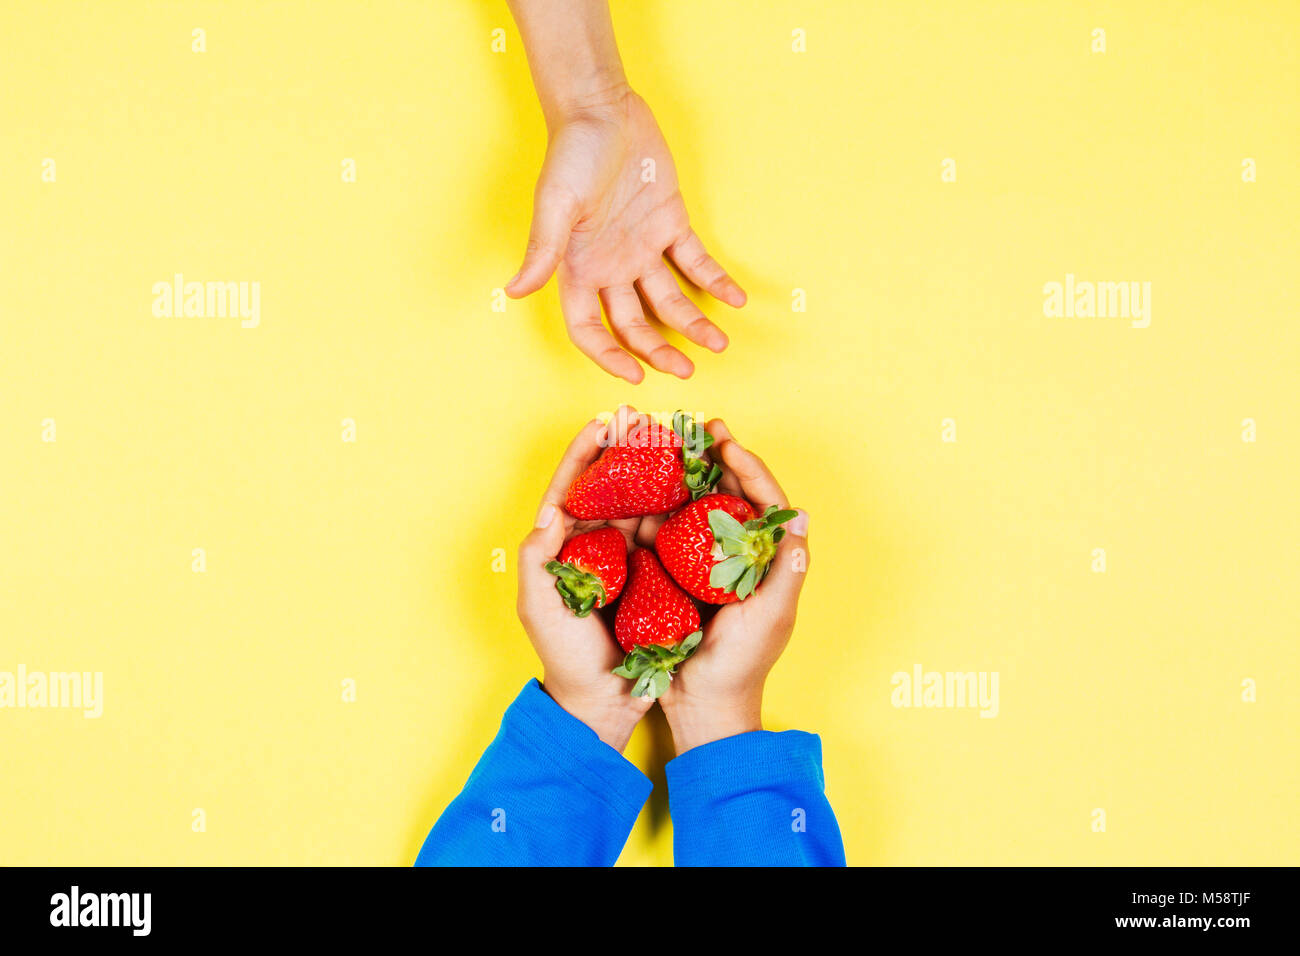 Kid hand taking strawberry from another child's hands Stock Photo